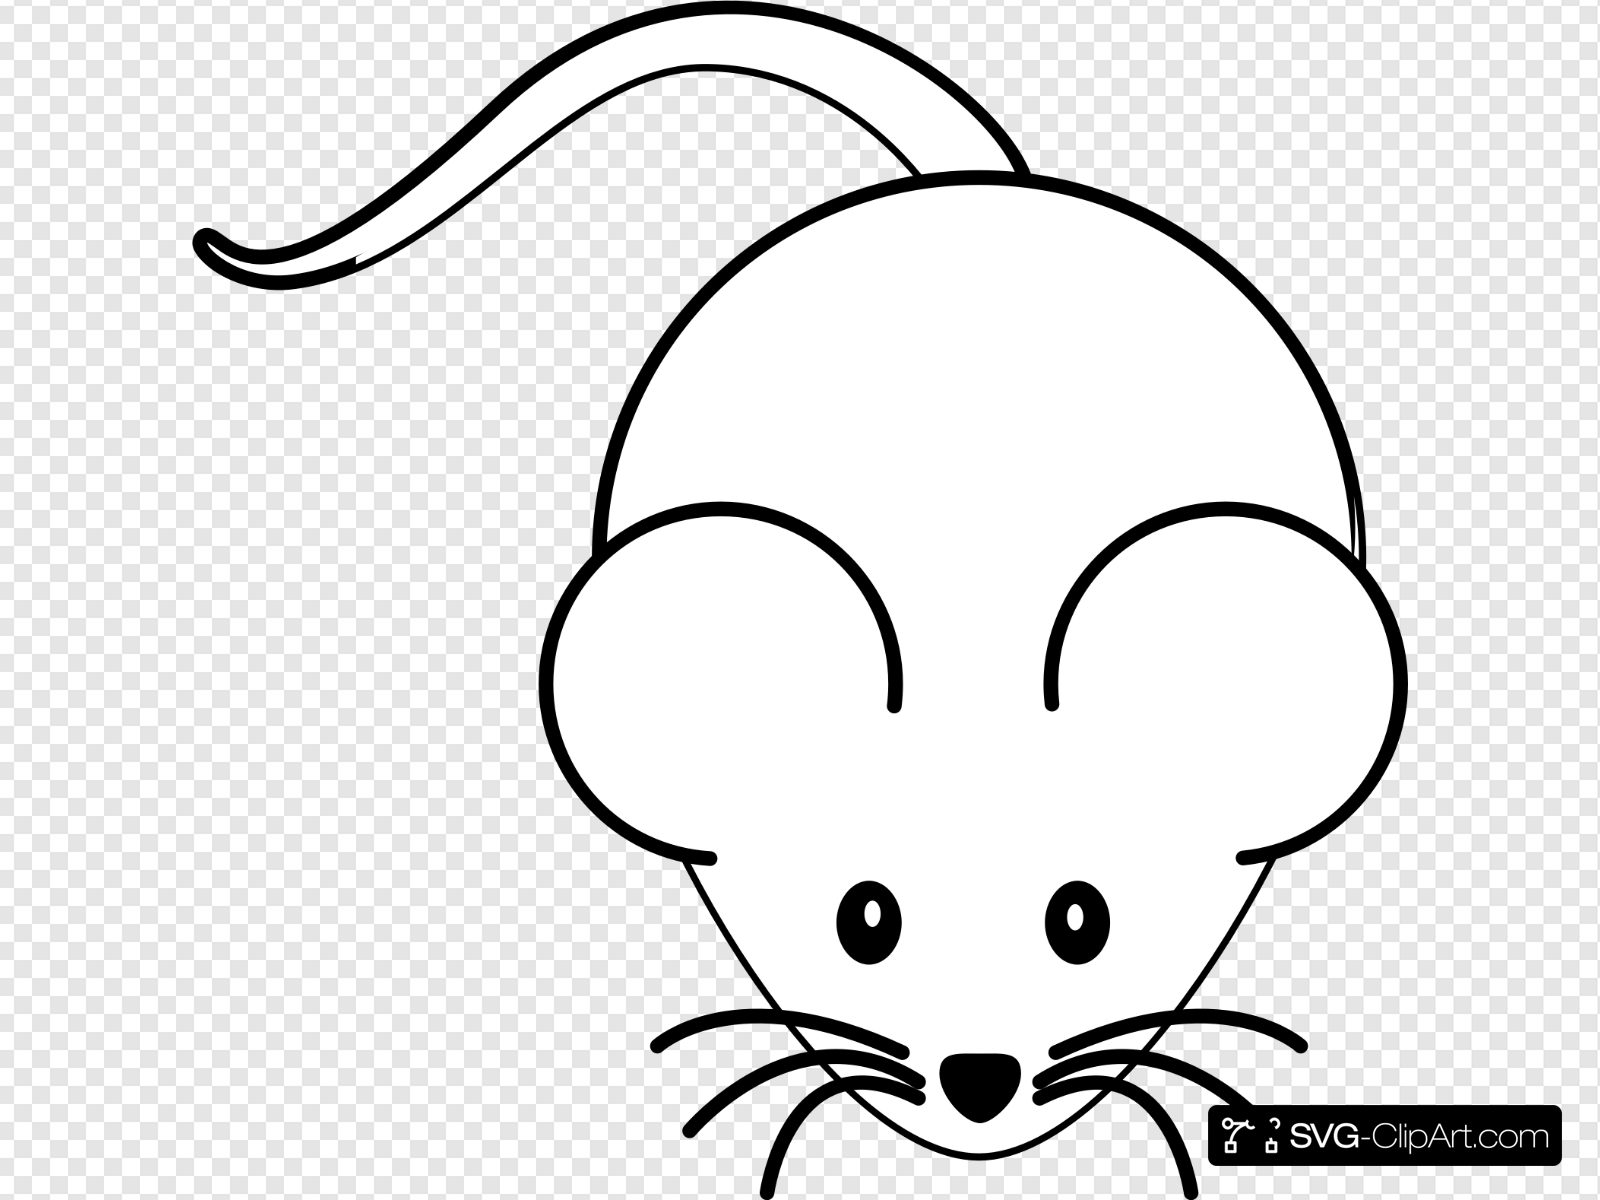 Black And White Mouse Clip art, Icon and SVG.